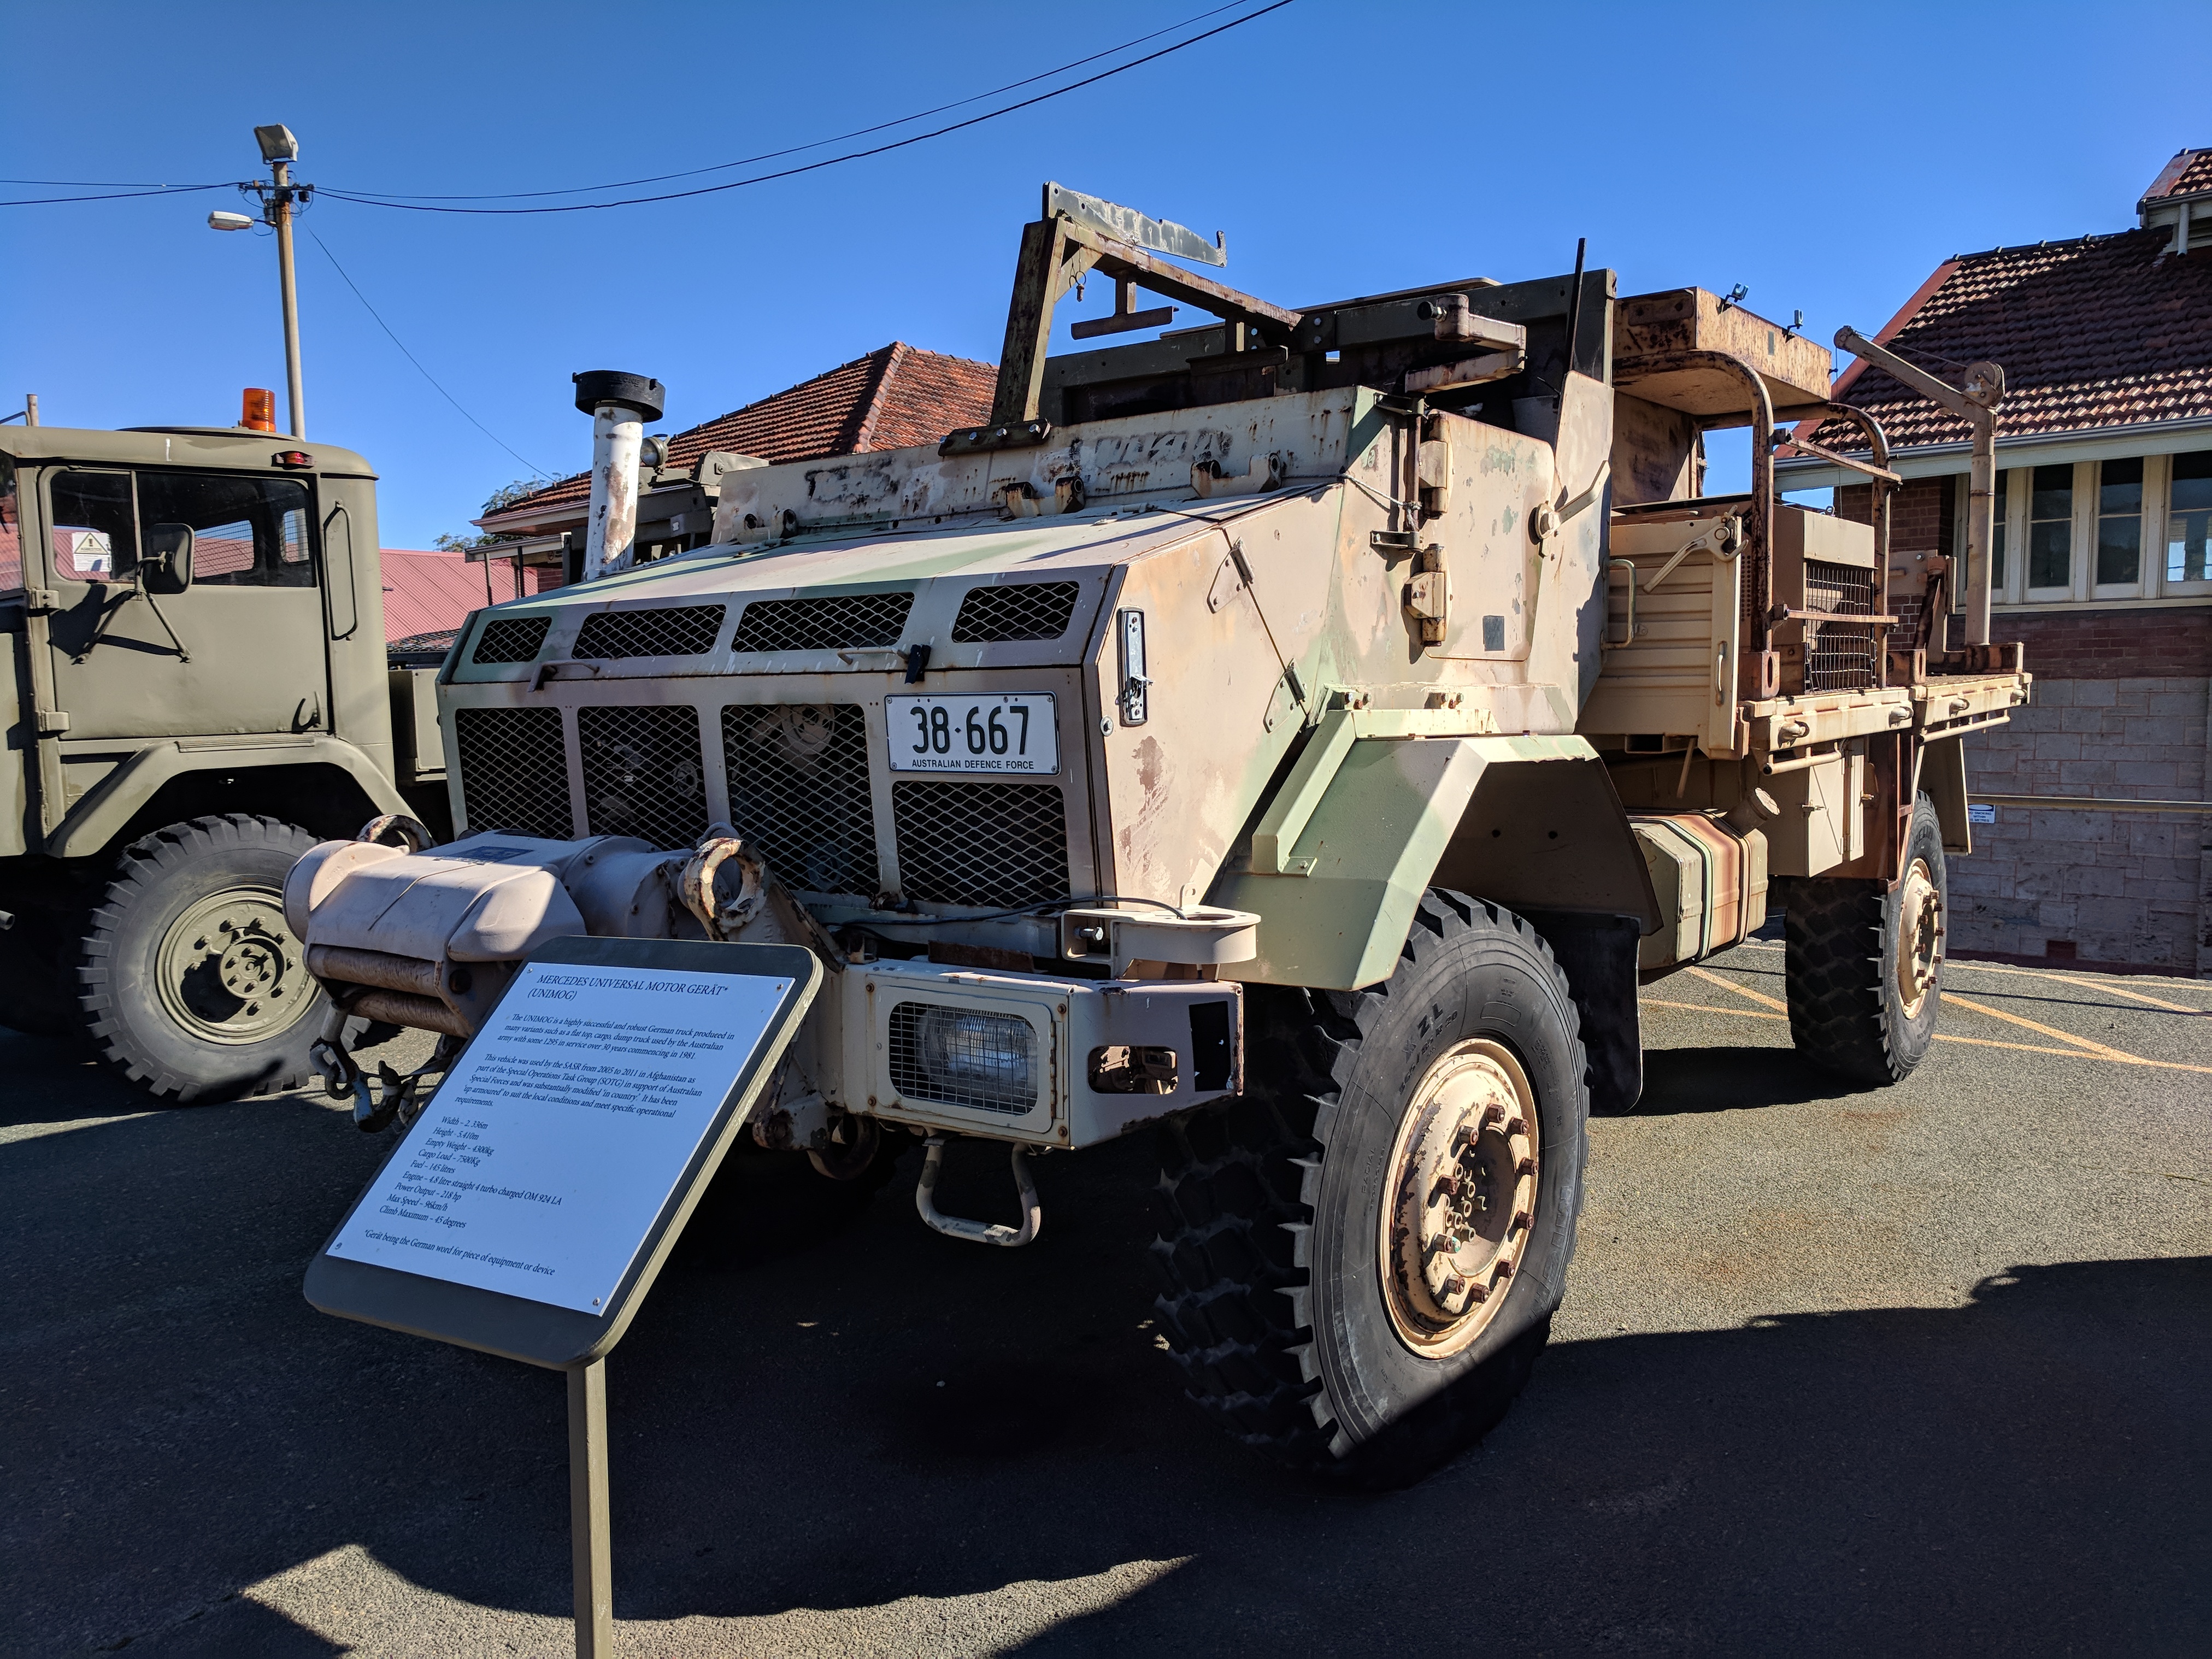 Unimog_truck_at_the_Army_Museum_of_WA_June_2018.jpg